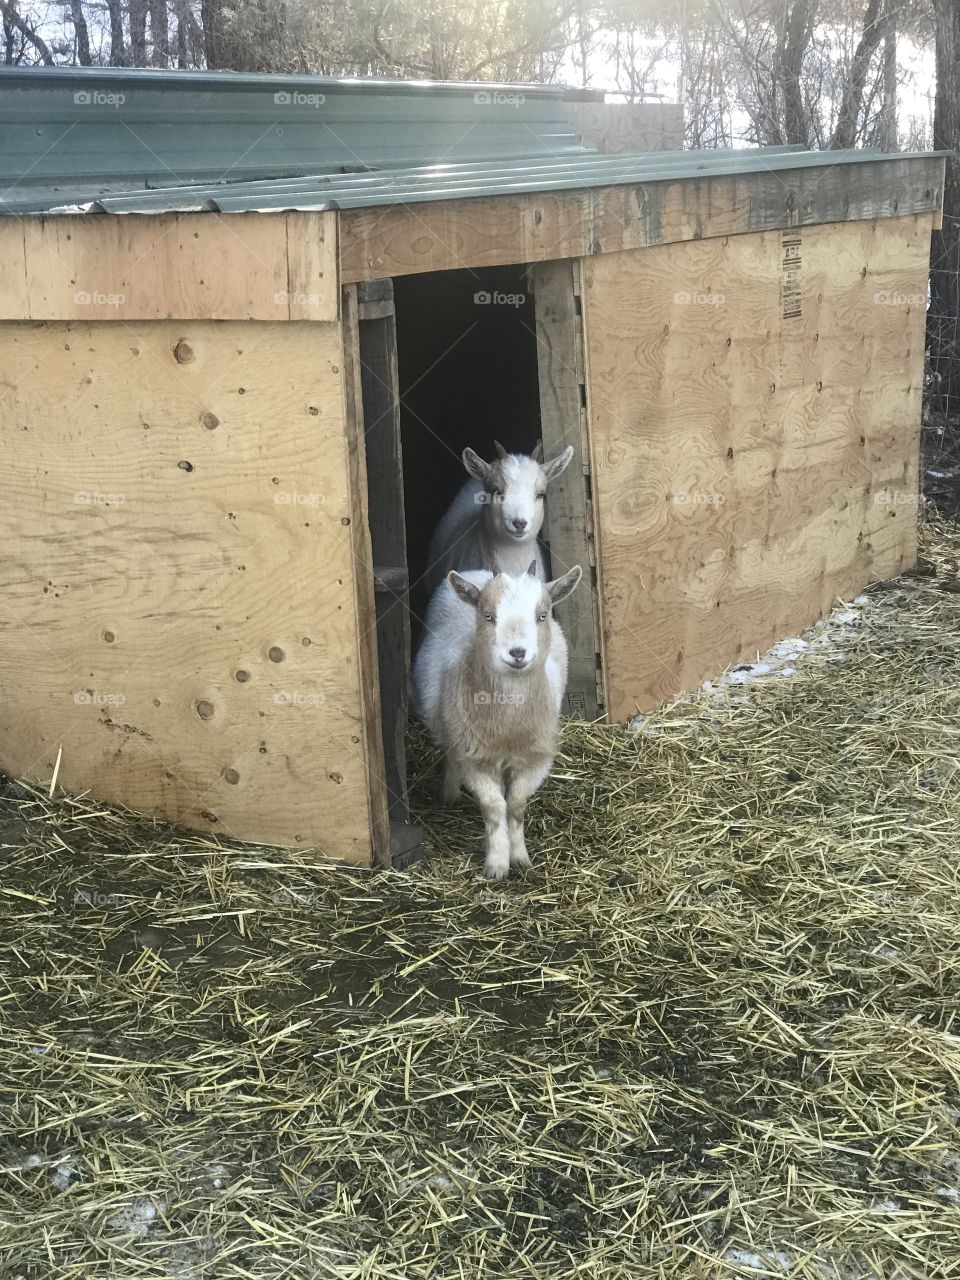 Two goat kids peeking out of a barn on a dreary winter day. White and tan goats.